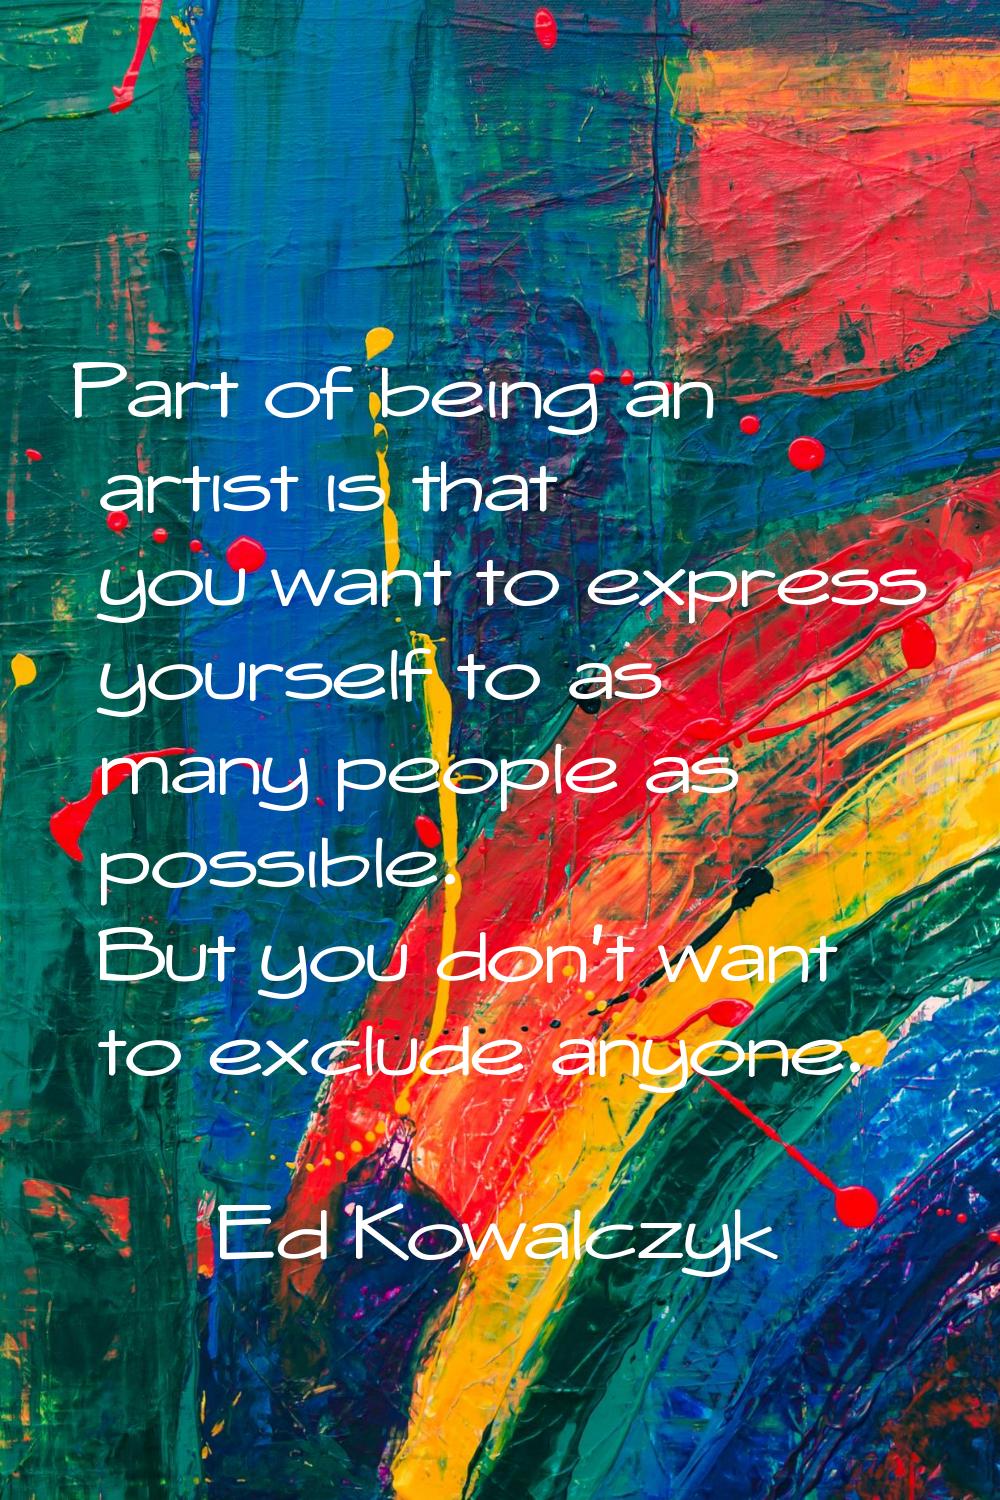 Part of being an artist is that you want to express yourself to as many people as possible. But you